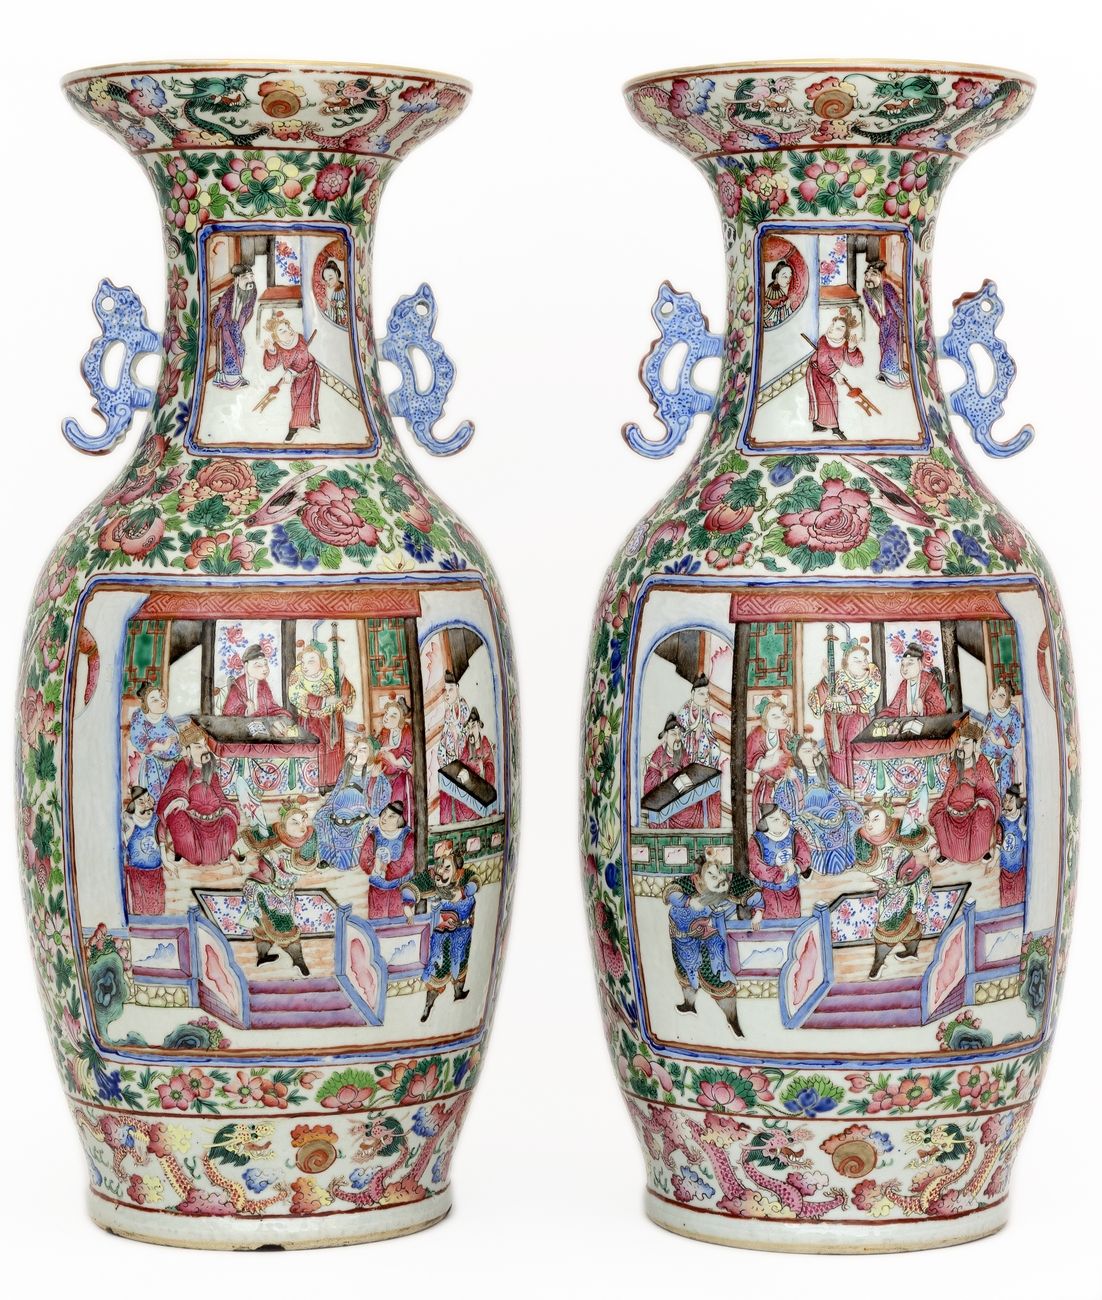 Null China, 19th century
A pair of Canton porcelain vases decorated in Famille R&hellip;